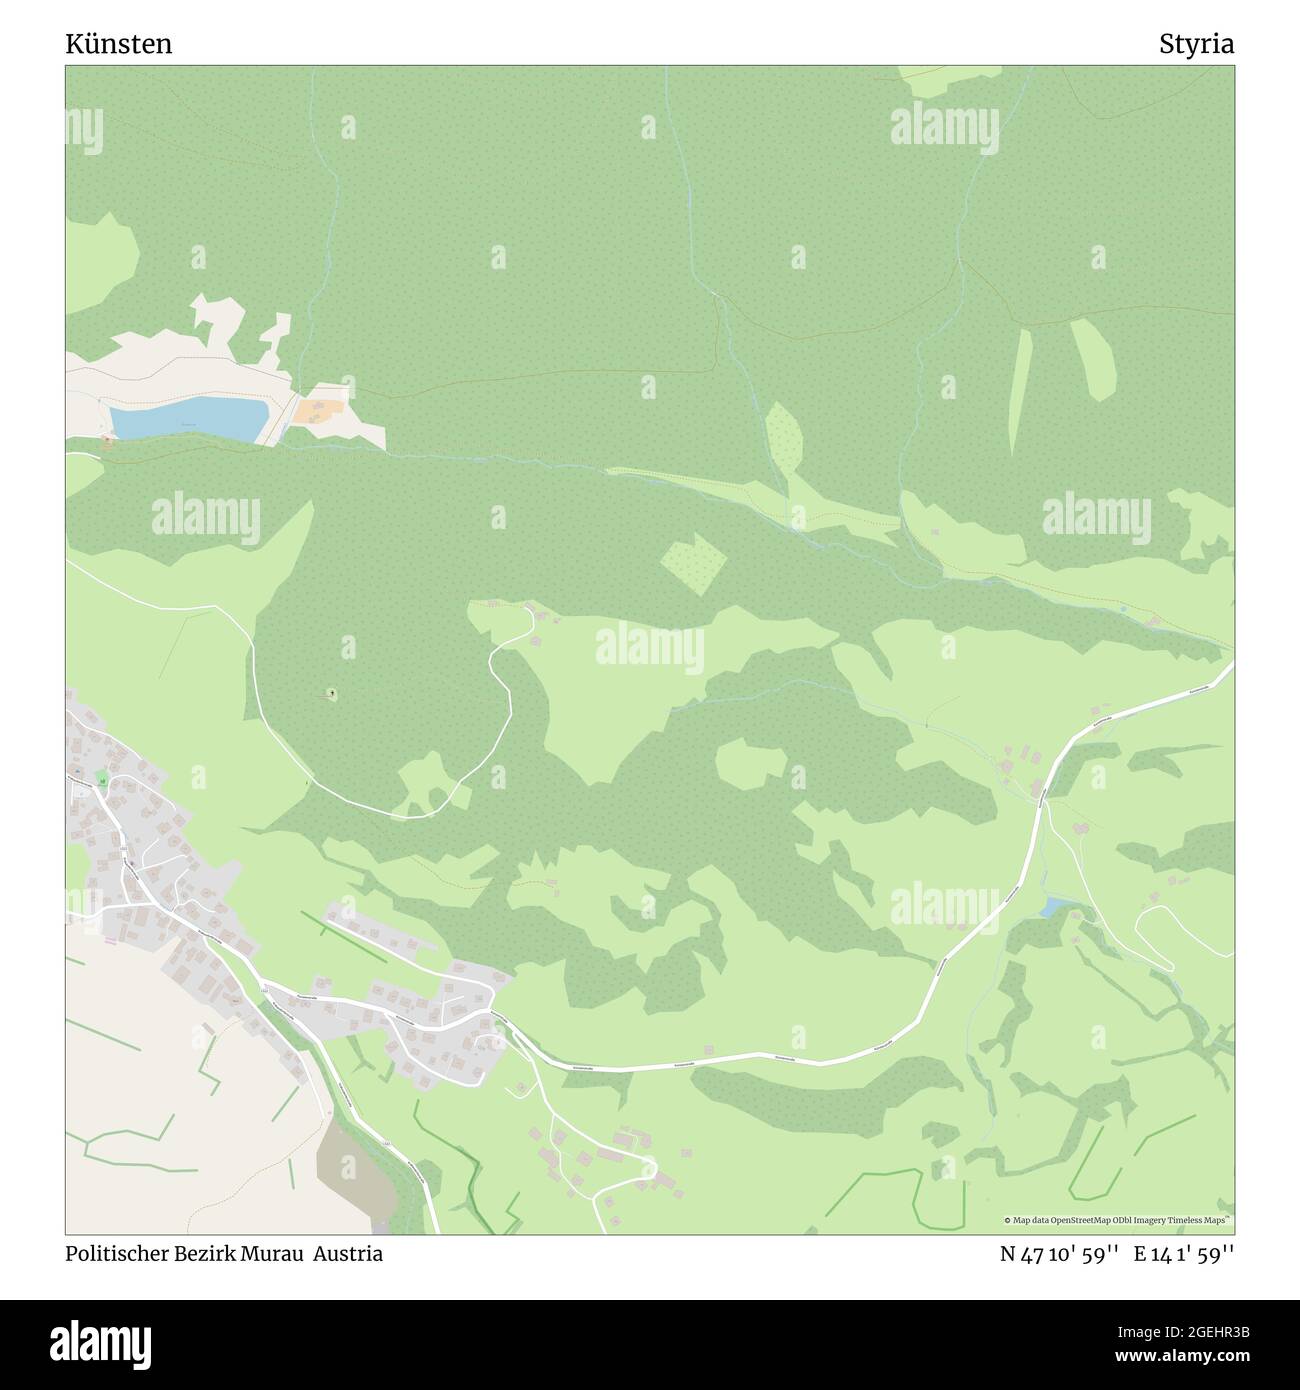 Künsten, Politischer Bezirk Murau, Austria, Styria, N 47 10' 59'', E 14 1' 59'', map, Timeless Map published in 2021. Travelers, explorers and adventurers like Florence Nightingale, David Livingstone, Ernest Shackleton, Lewis and Clark and Sherlock Holmes relied on maps to plan travels to the world's most remote corners, Timeless Maps is mapping most locations on the globe, showing the achievement of great dreams Stock Photo